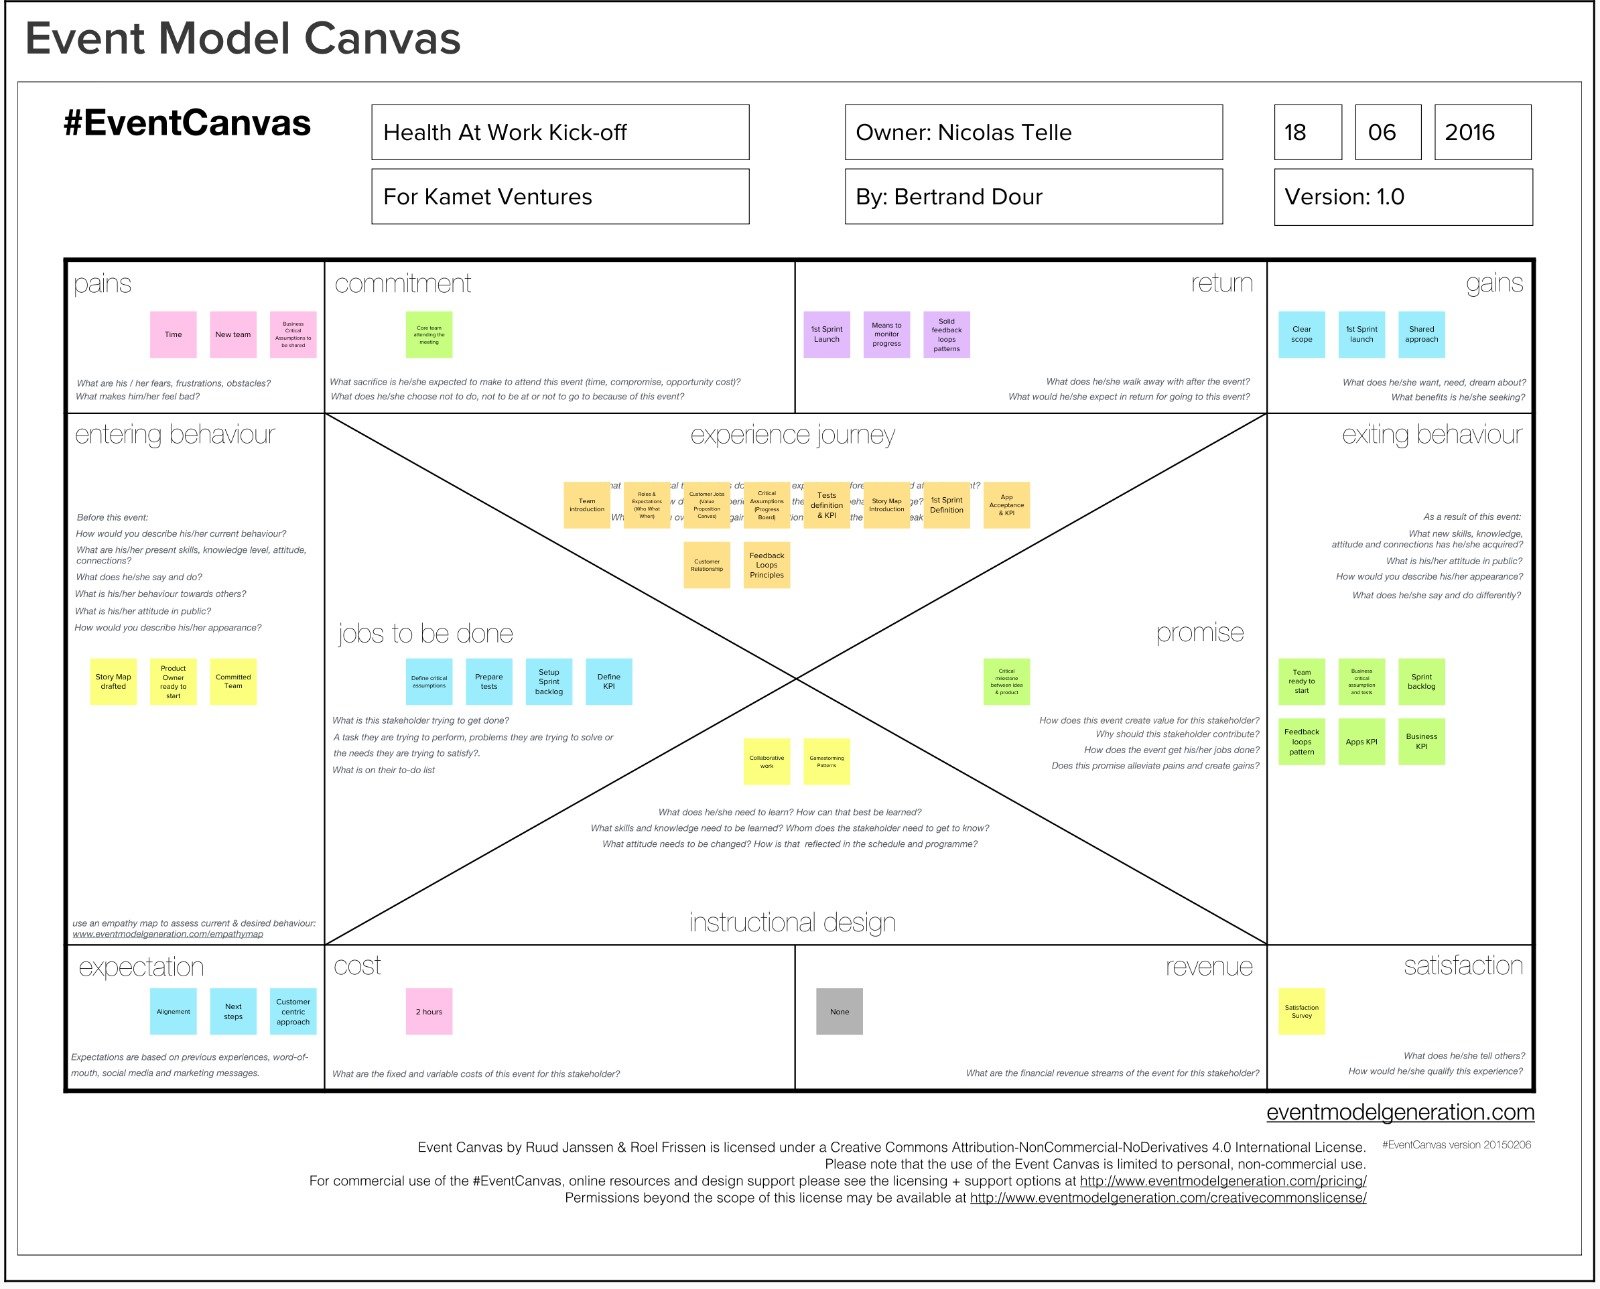 Event Model Canvas